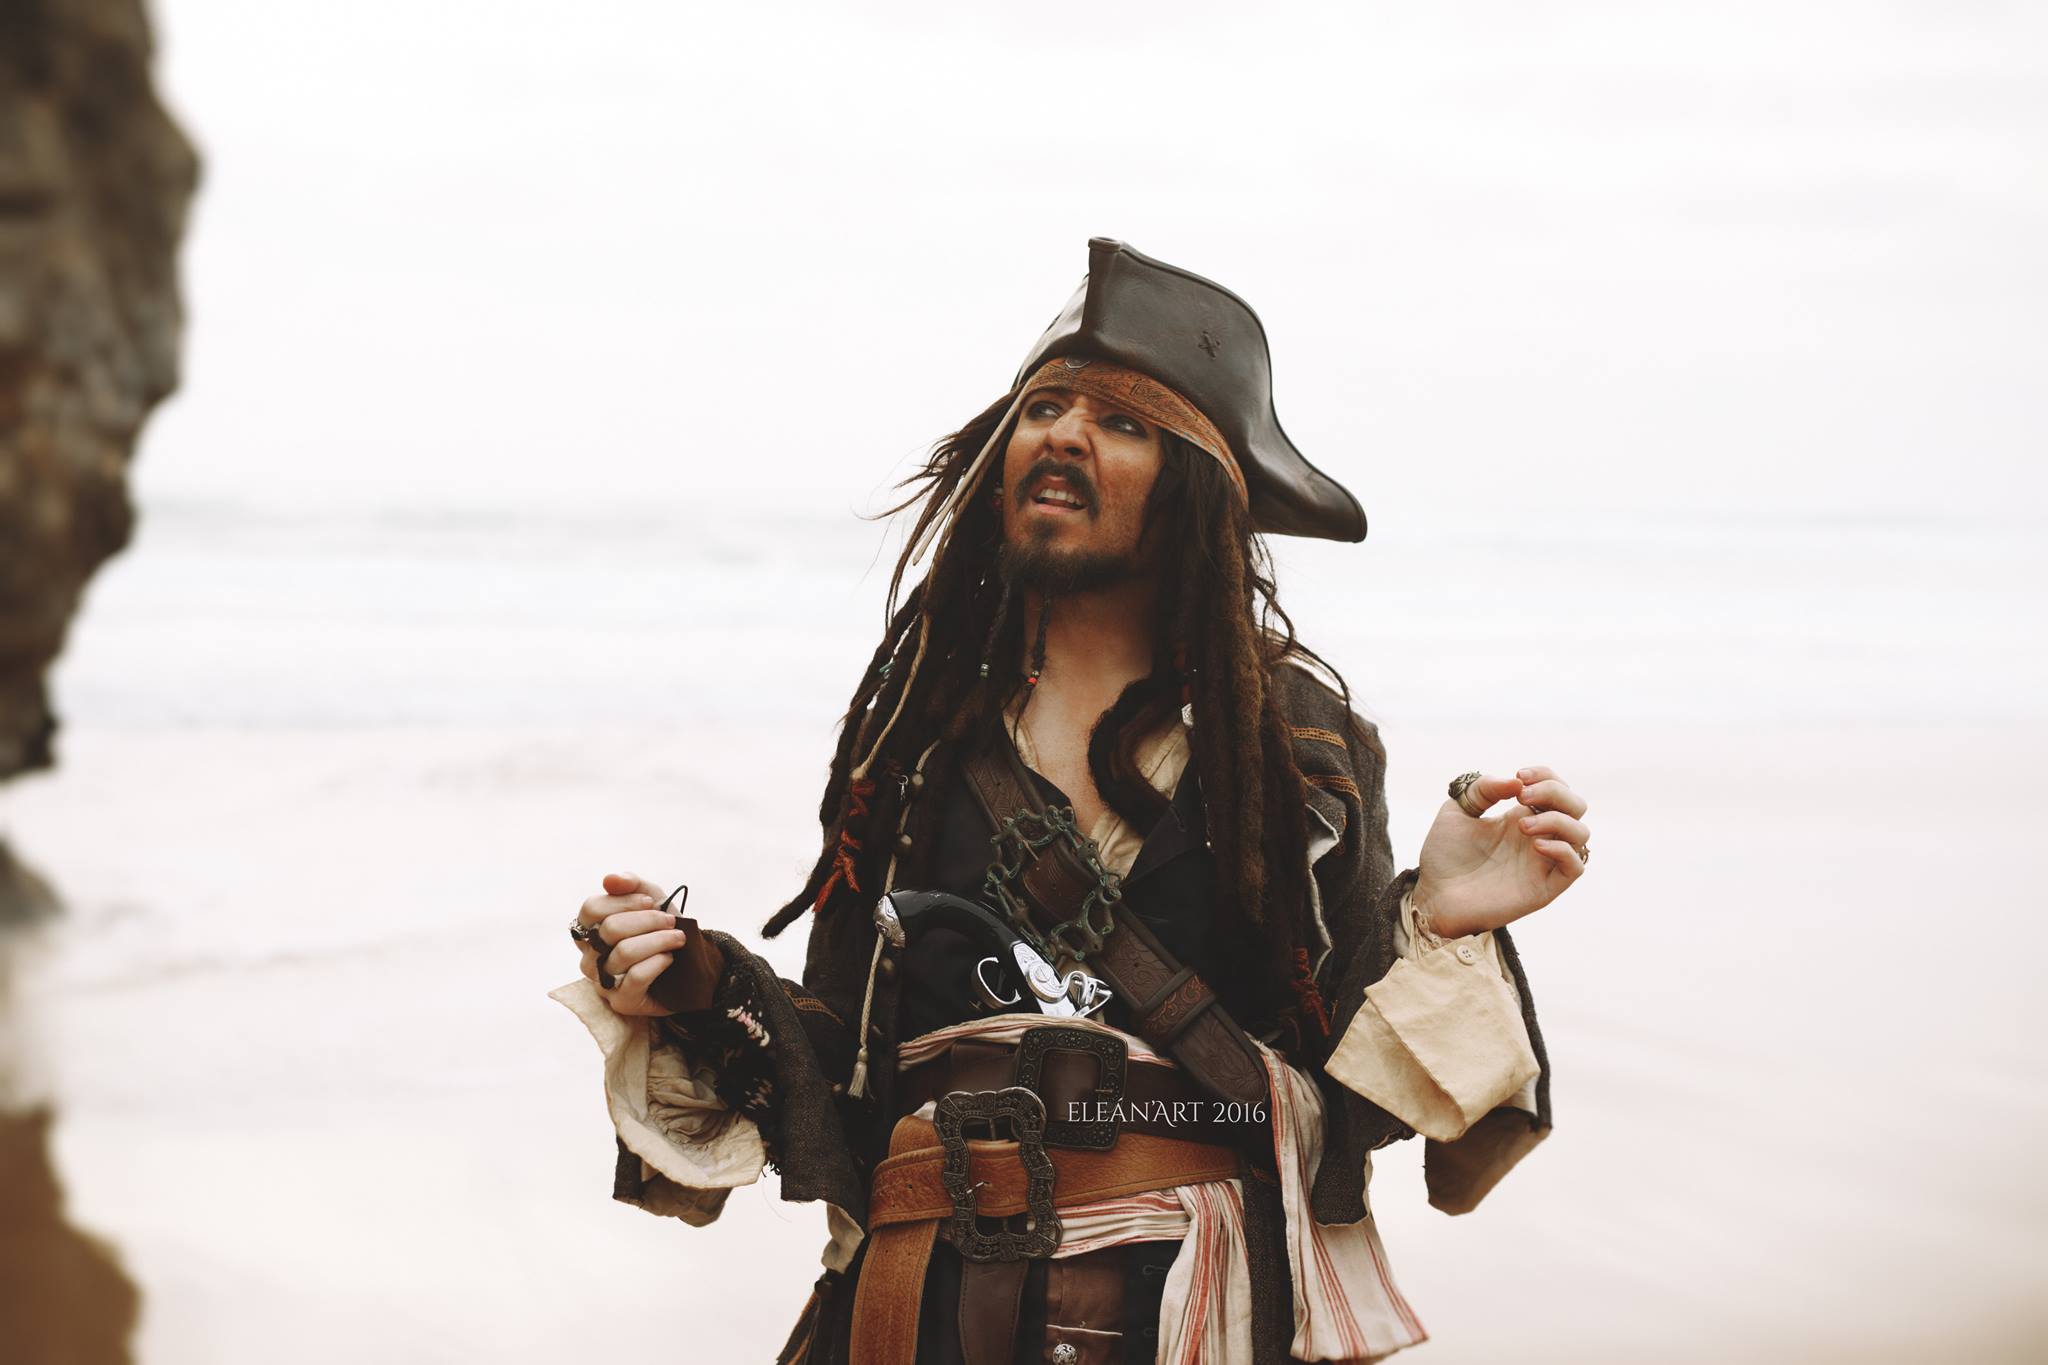 Pirates Of The Caribbean Cosplay Gets It 100% Right